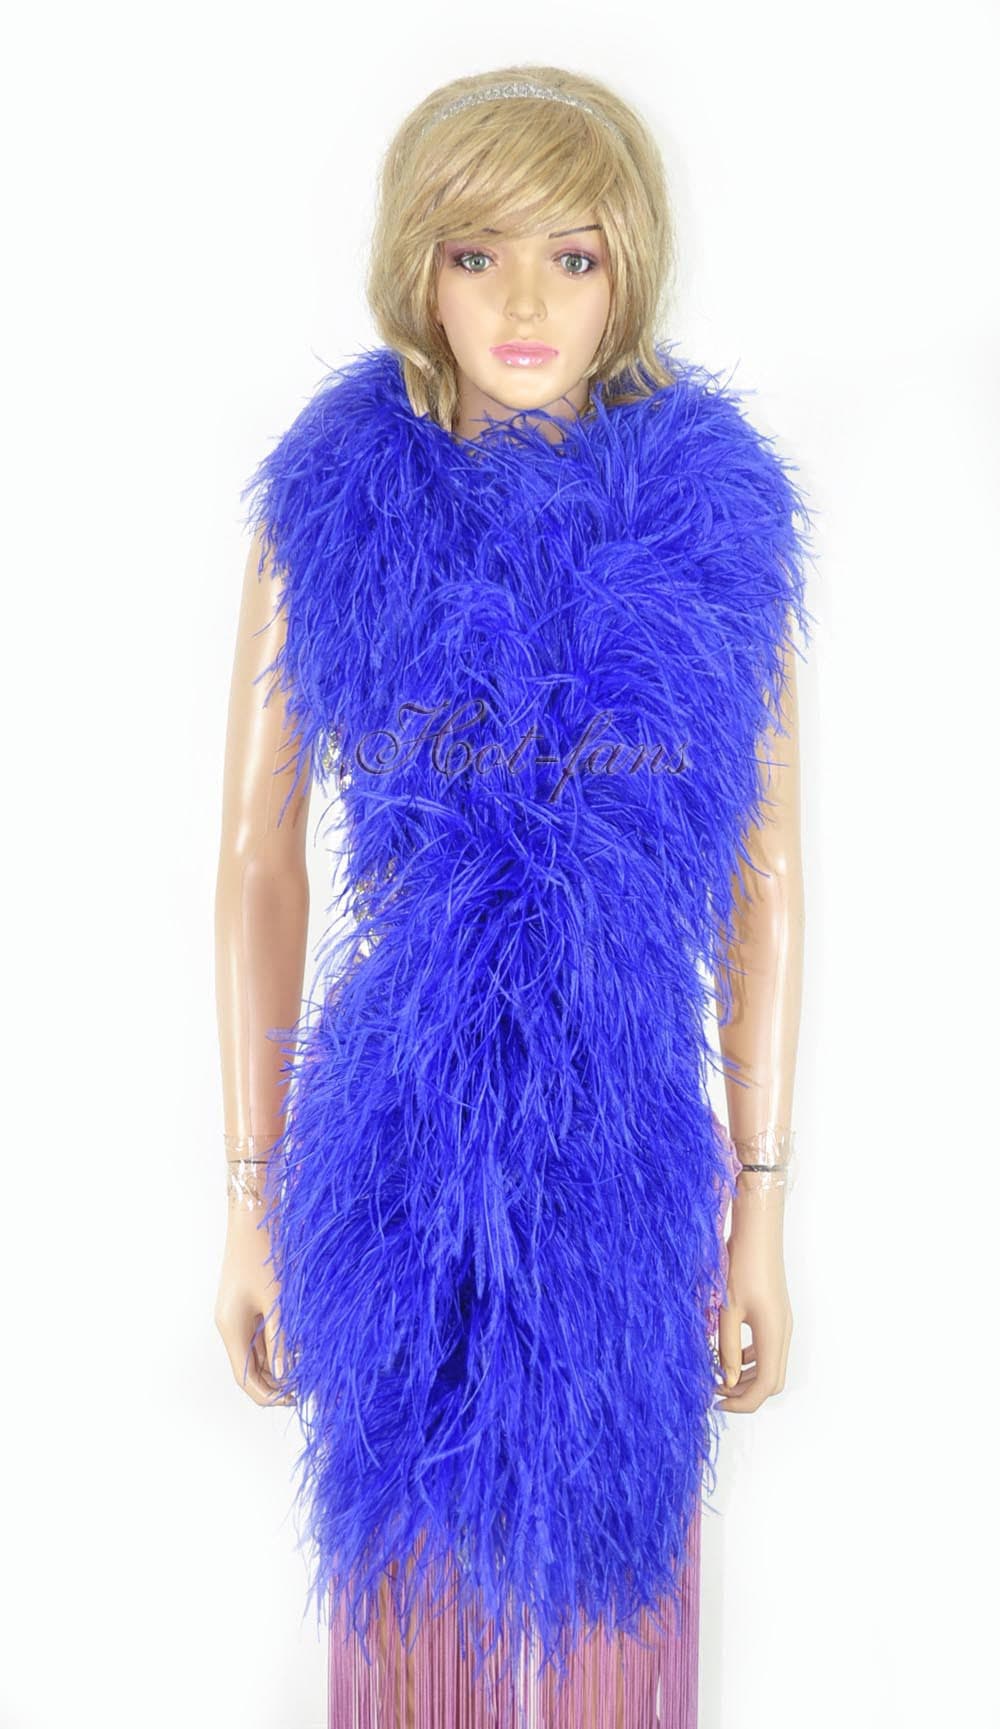 Luxury Crafted Ostrich Feather Boa - 180cm/71 Long, 20 Ply|hot Fans